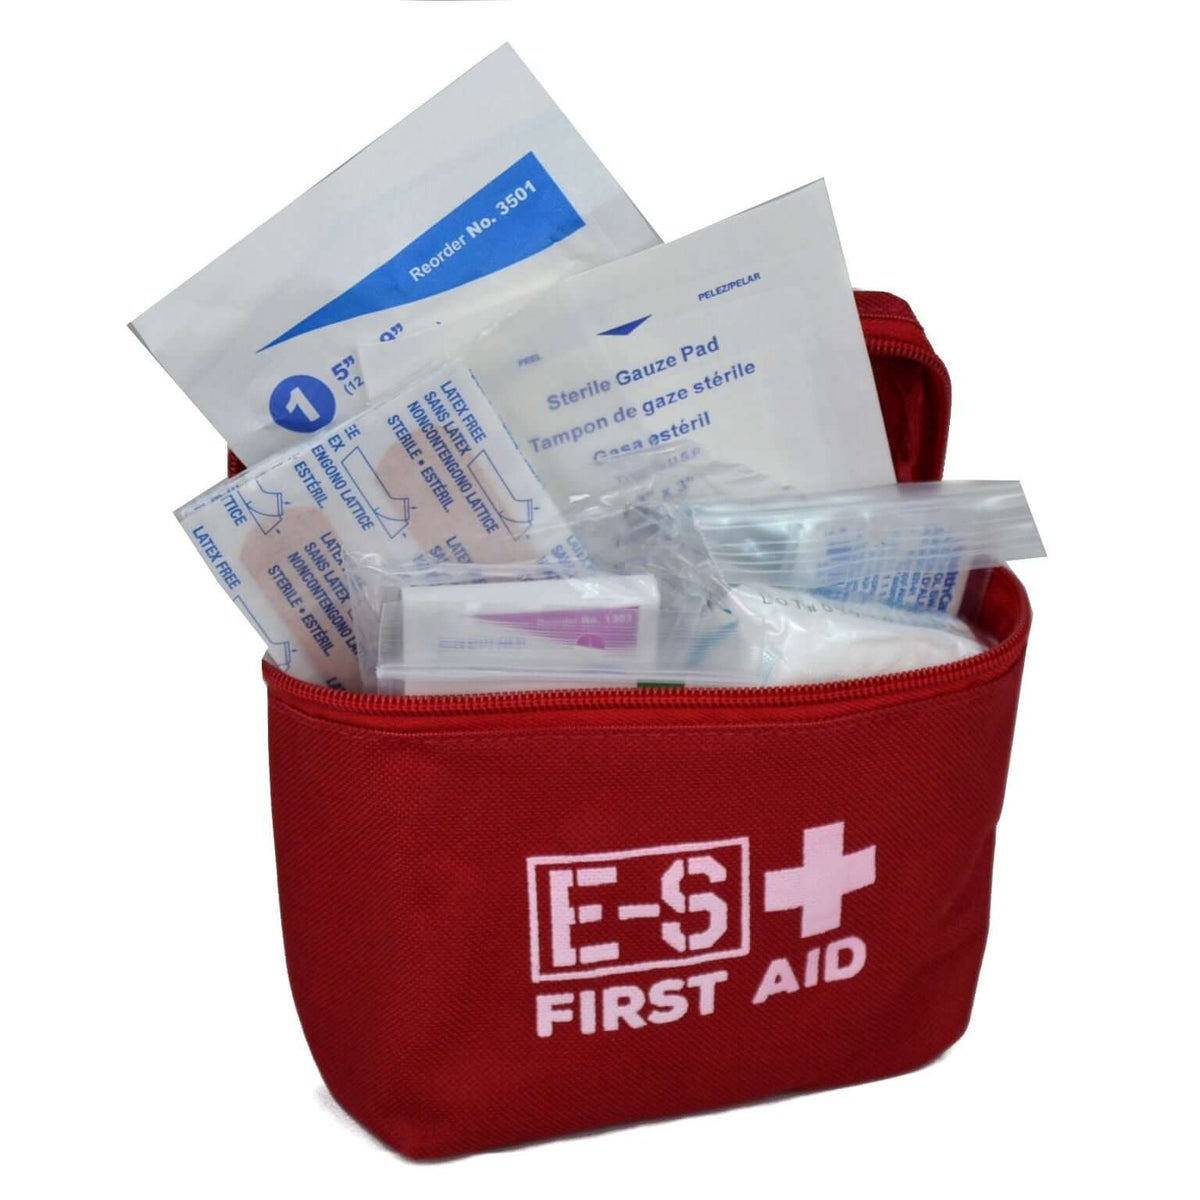 Echo-Sigma Compact First Aid Kit with top open